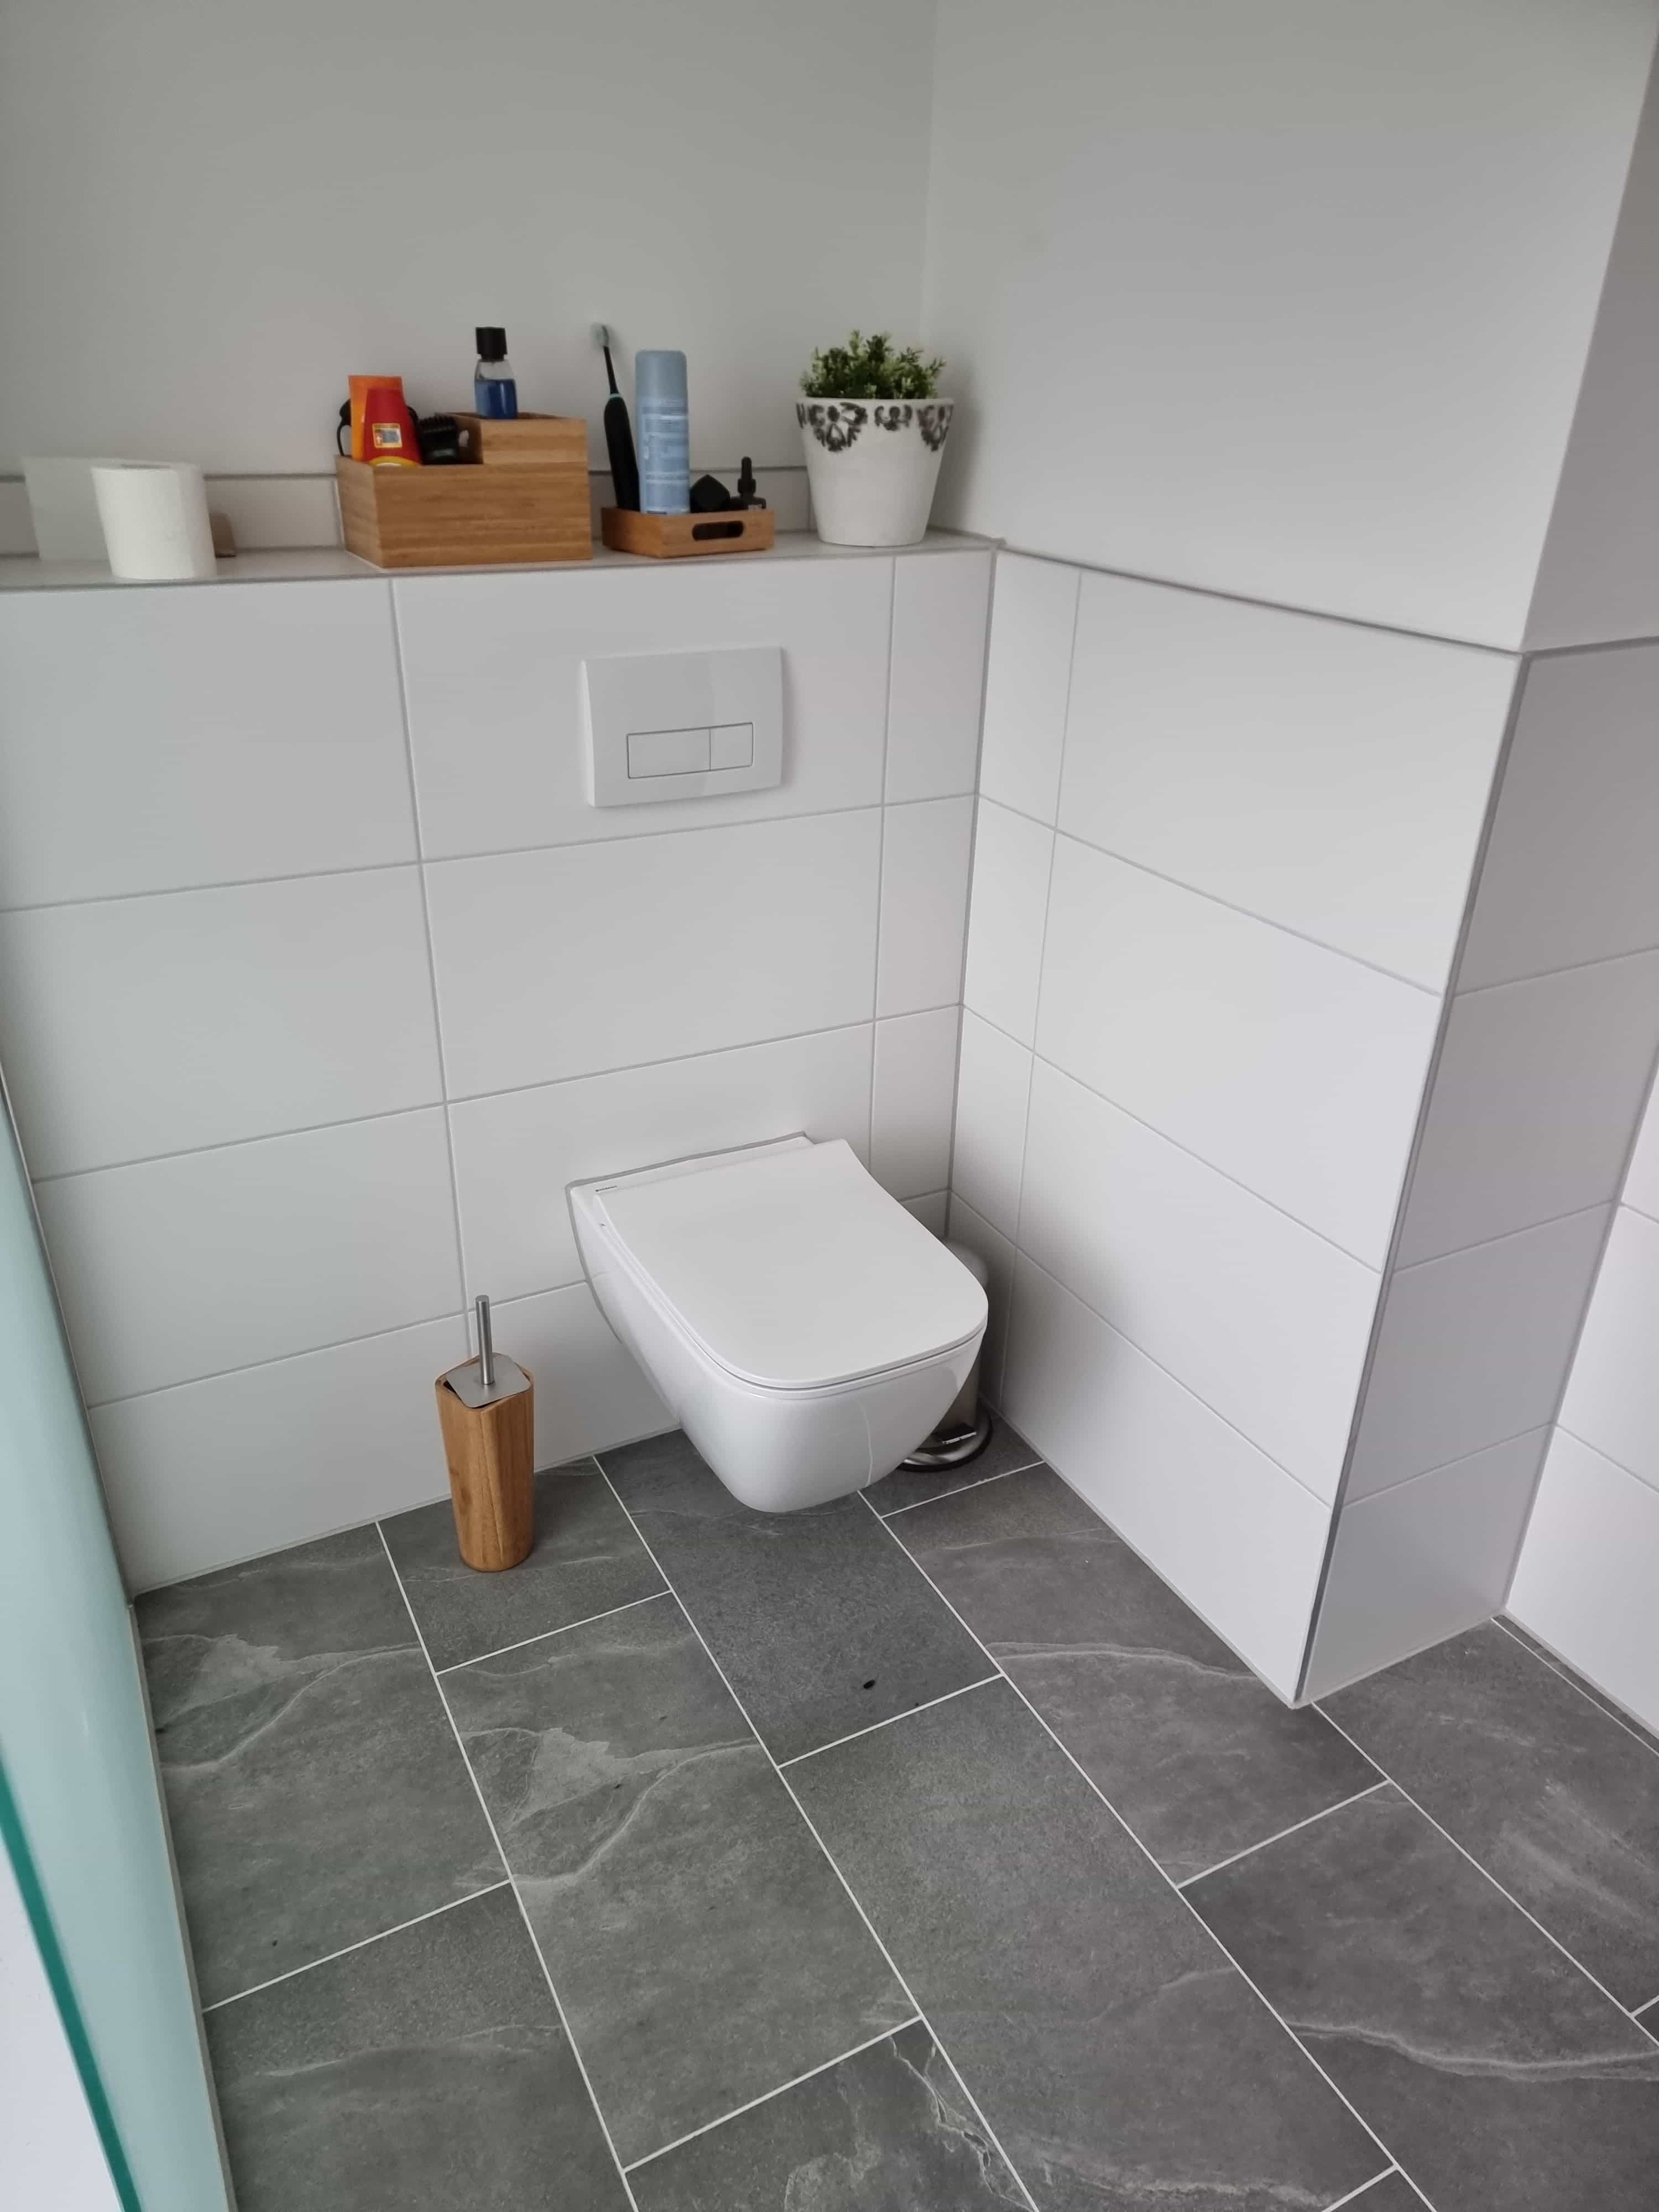 The bathroom was completely renovated by Guido Breitbach. The picture shows a bathroom with a toilet gray floor tiles and white rectangular large tiles on the wall.